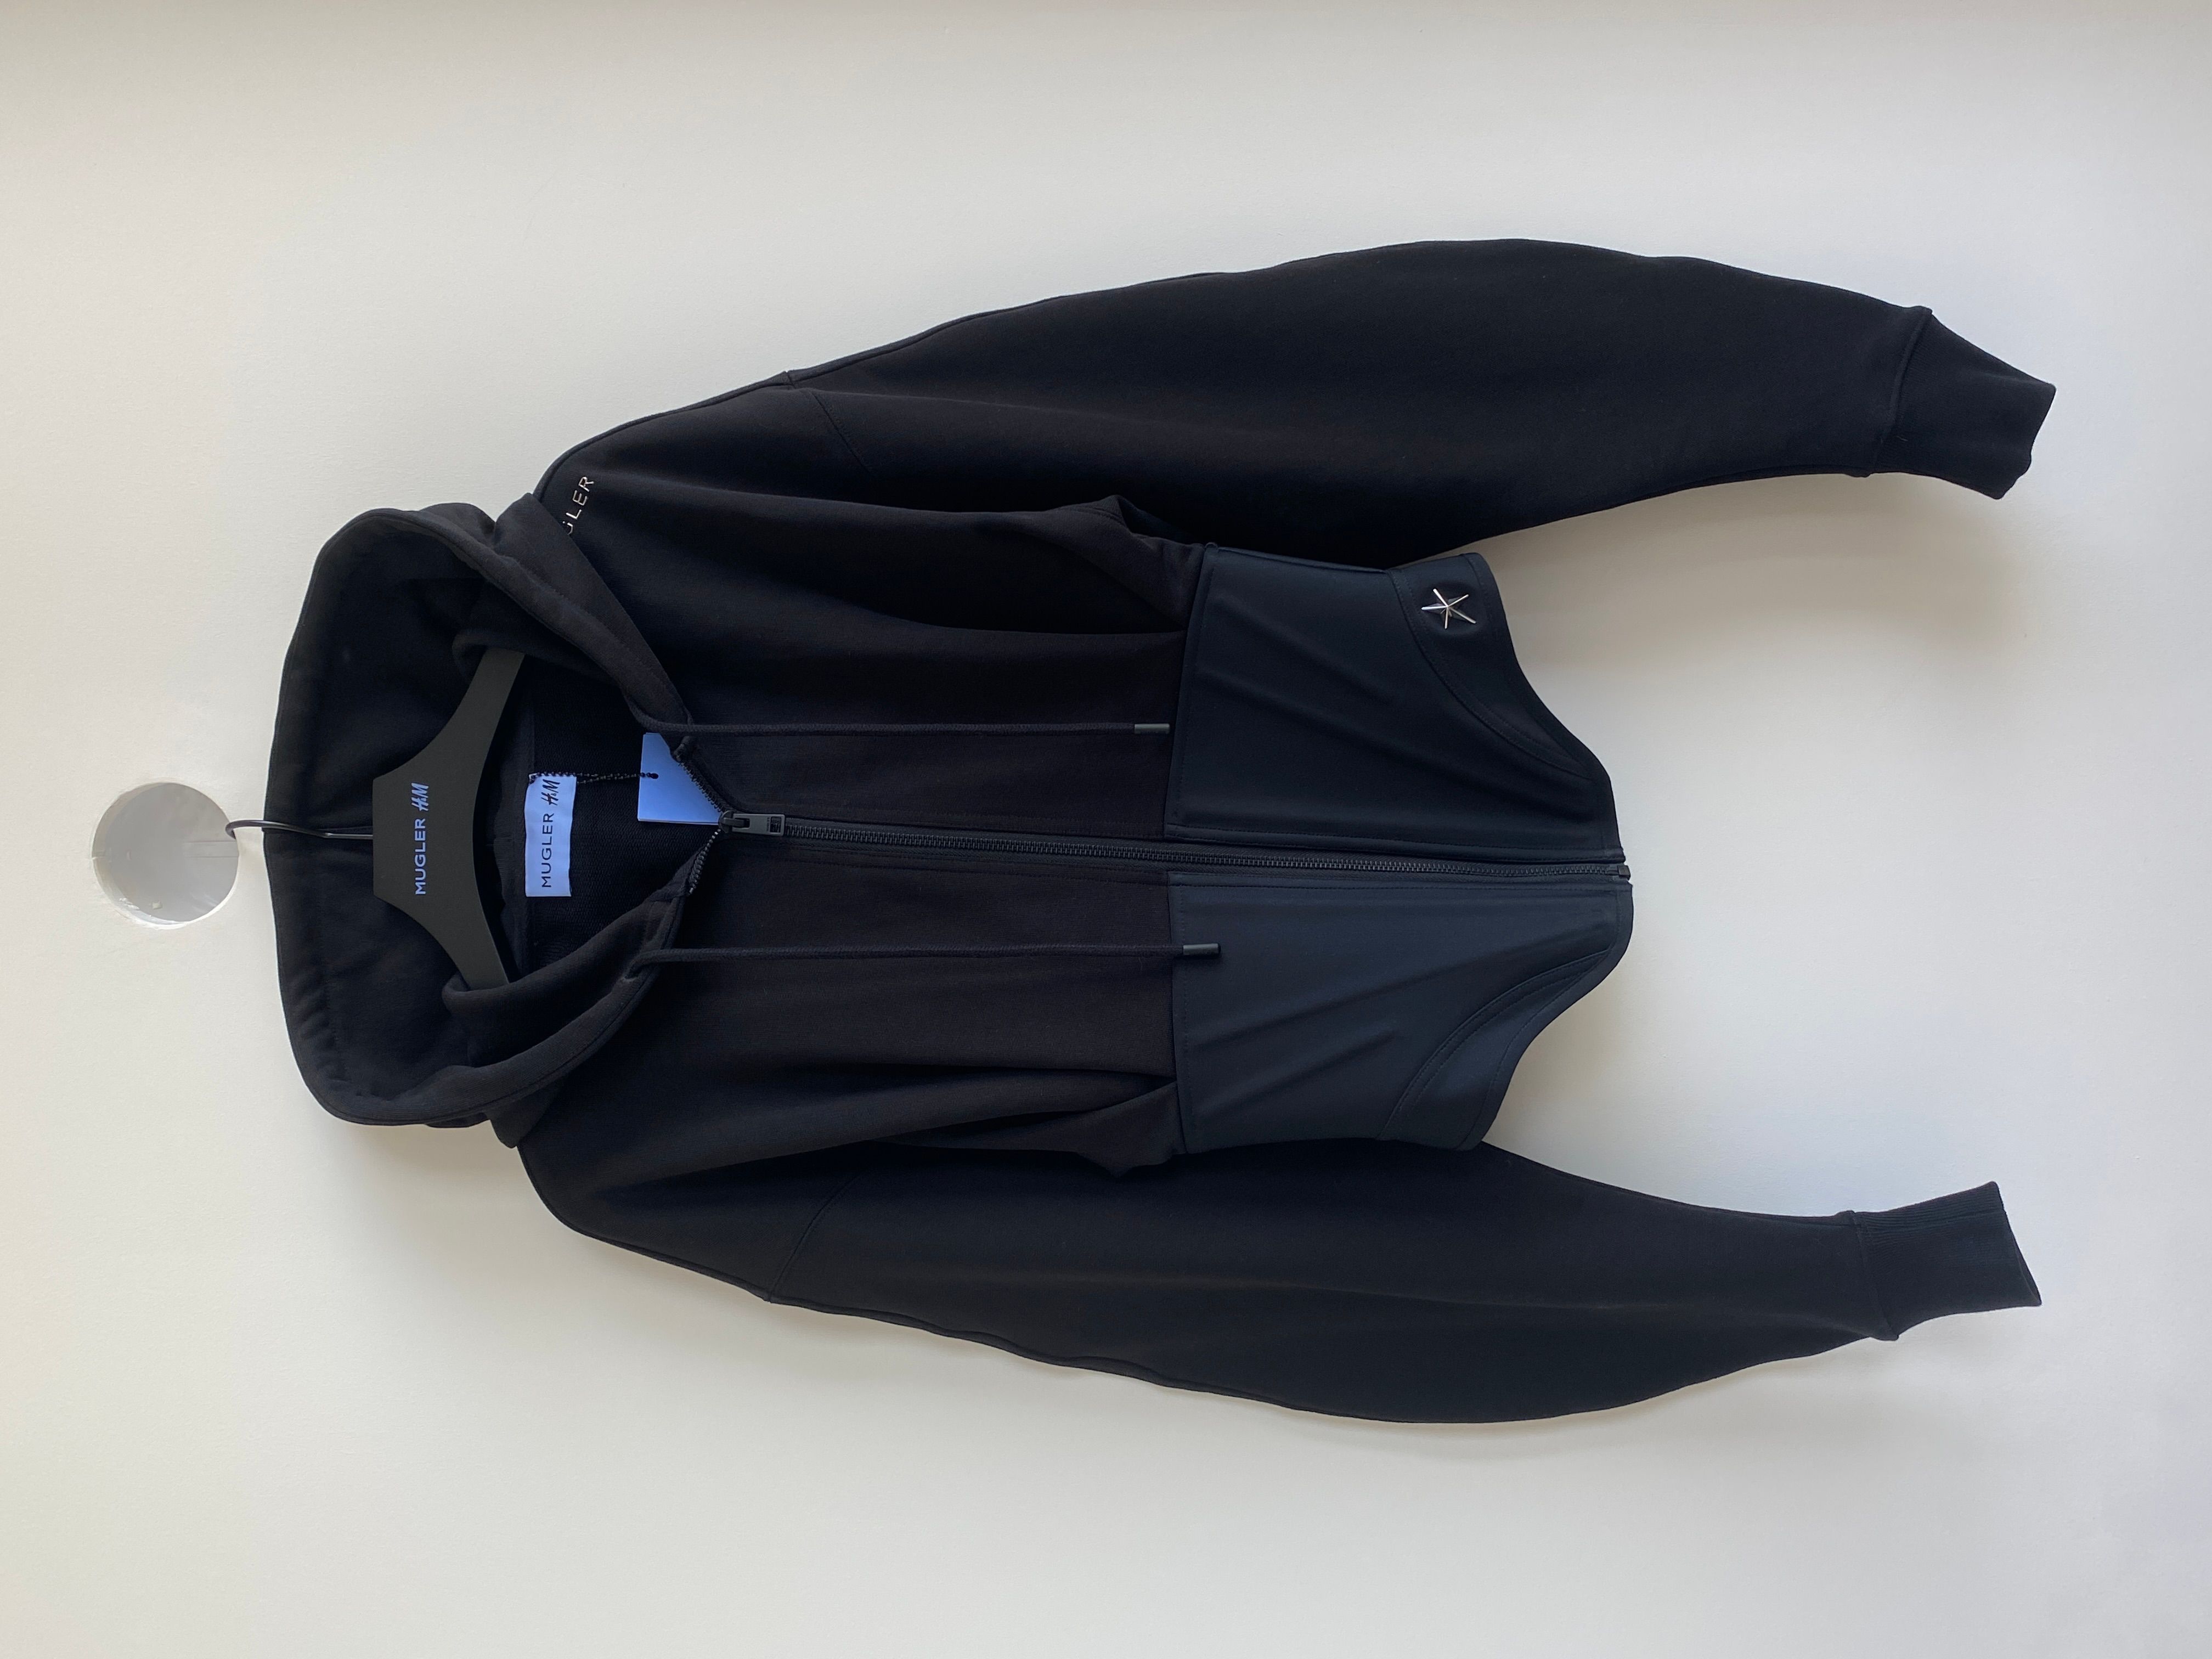 shufitri on X: Mugler H&M - Got to try on this corset hoodie